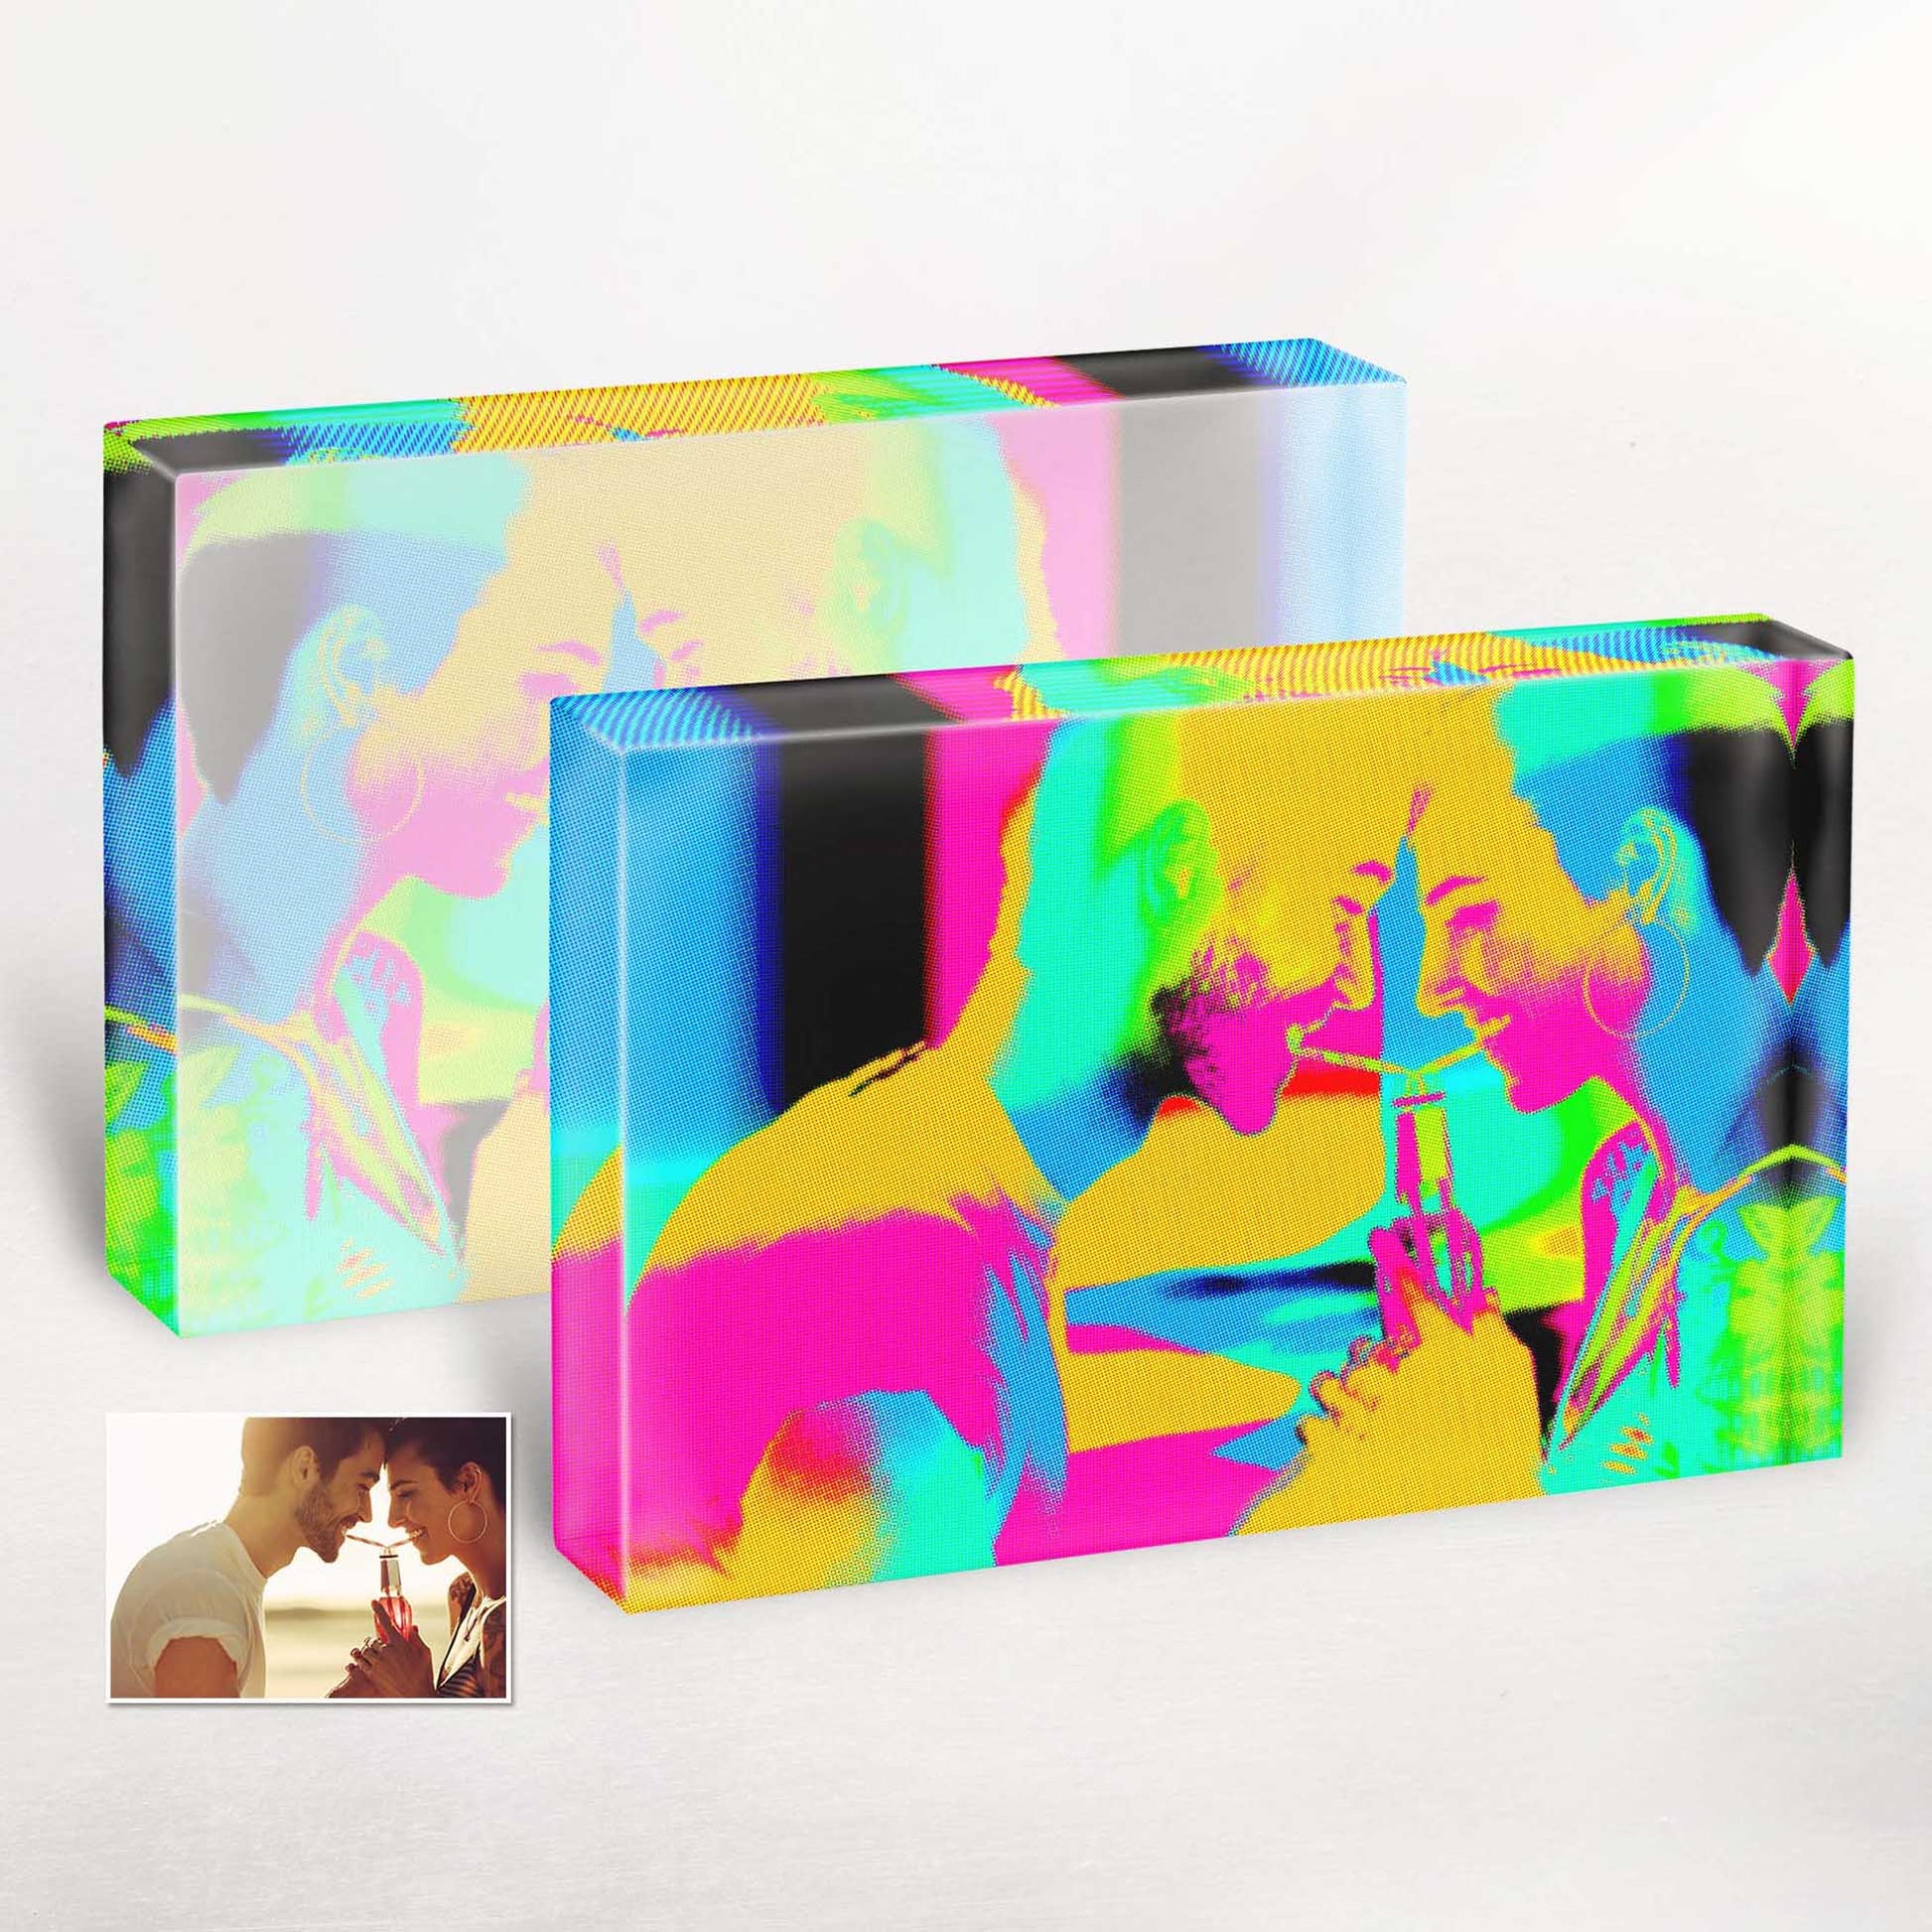 Add a splash of color to your decor with the Personalised Pop Art Acrylic Block Photo. Its unique and bright design captures the essence of pop art, creating a fun and exciting atmosphere